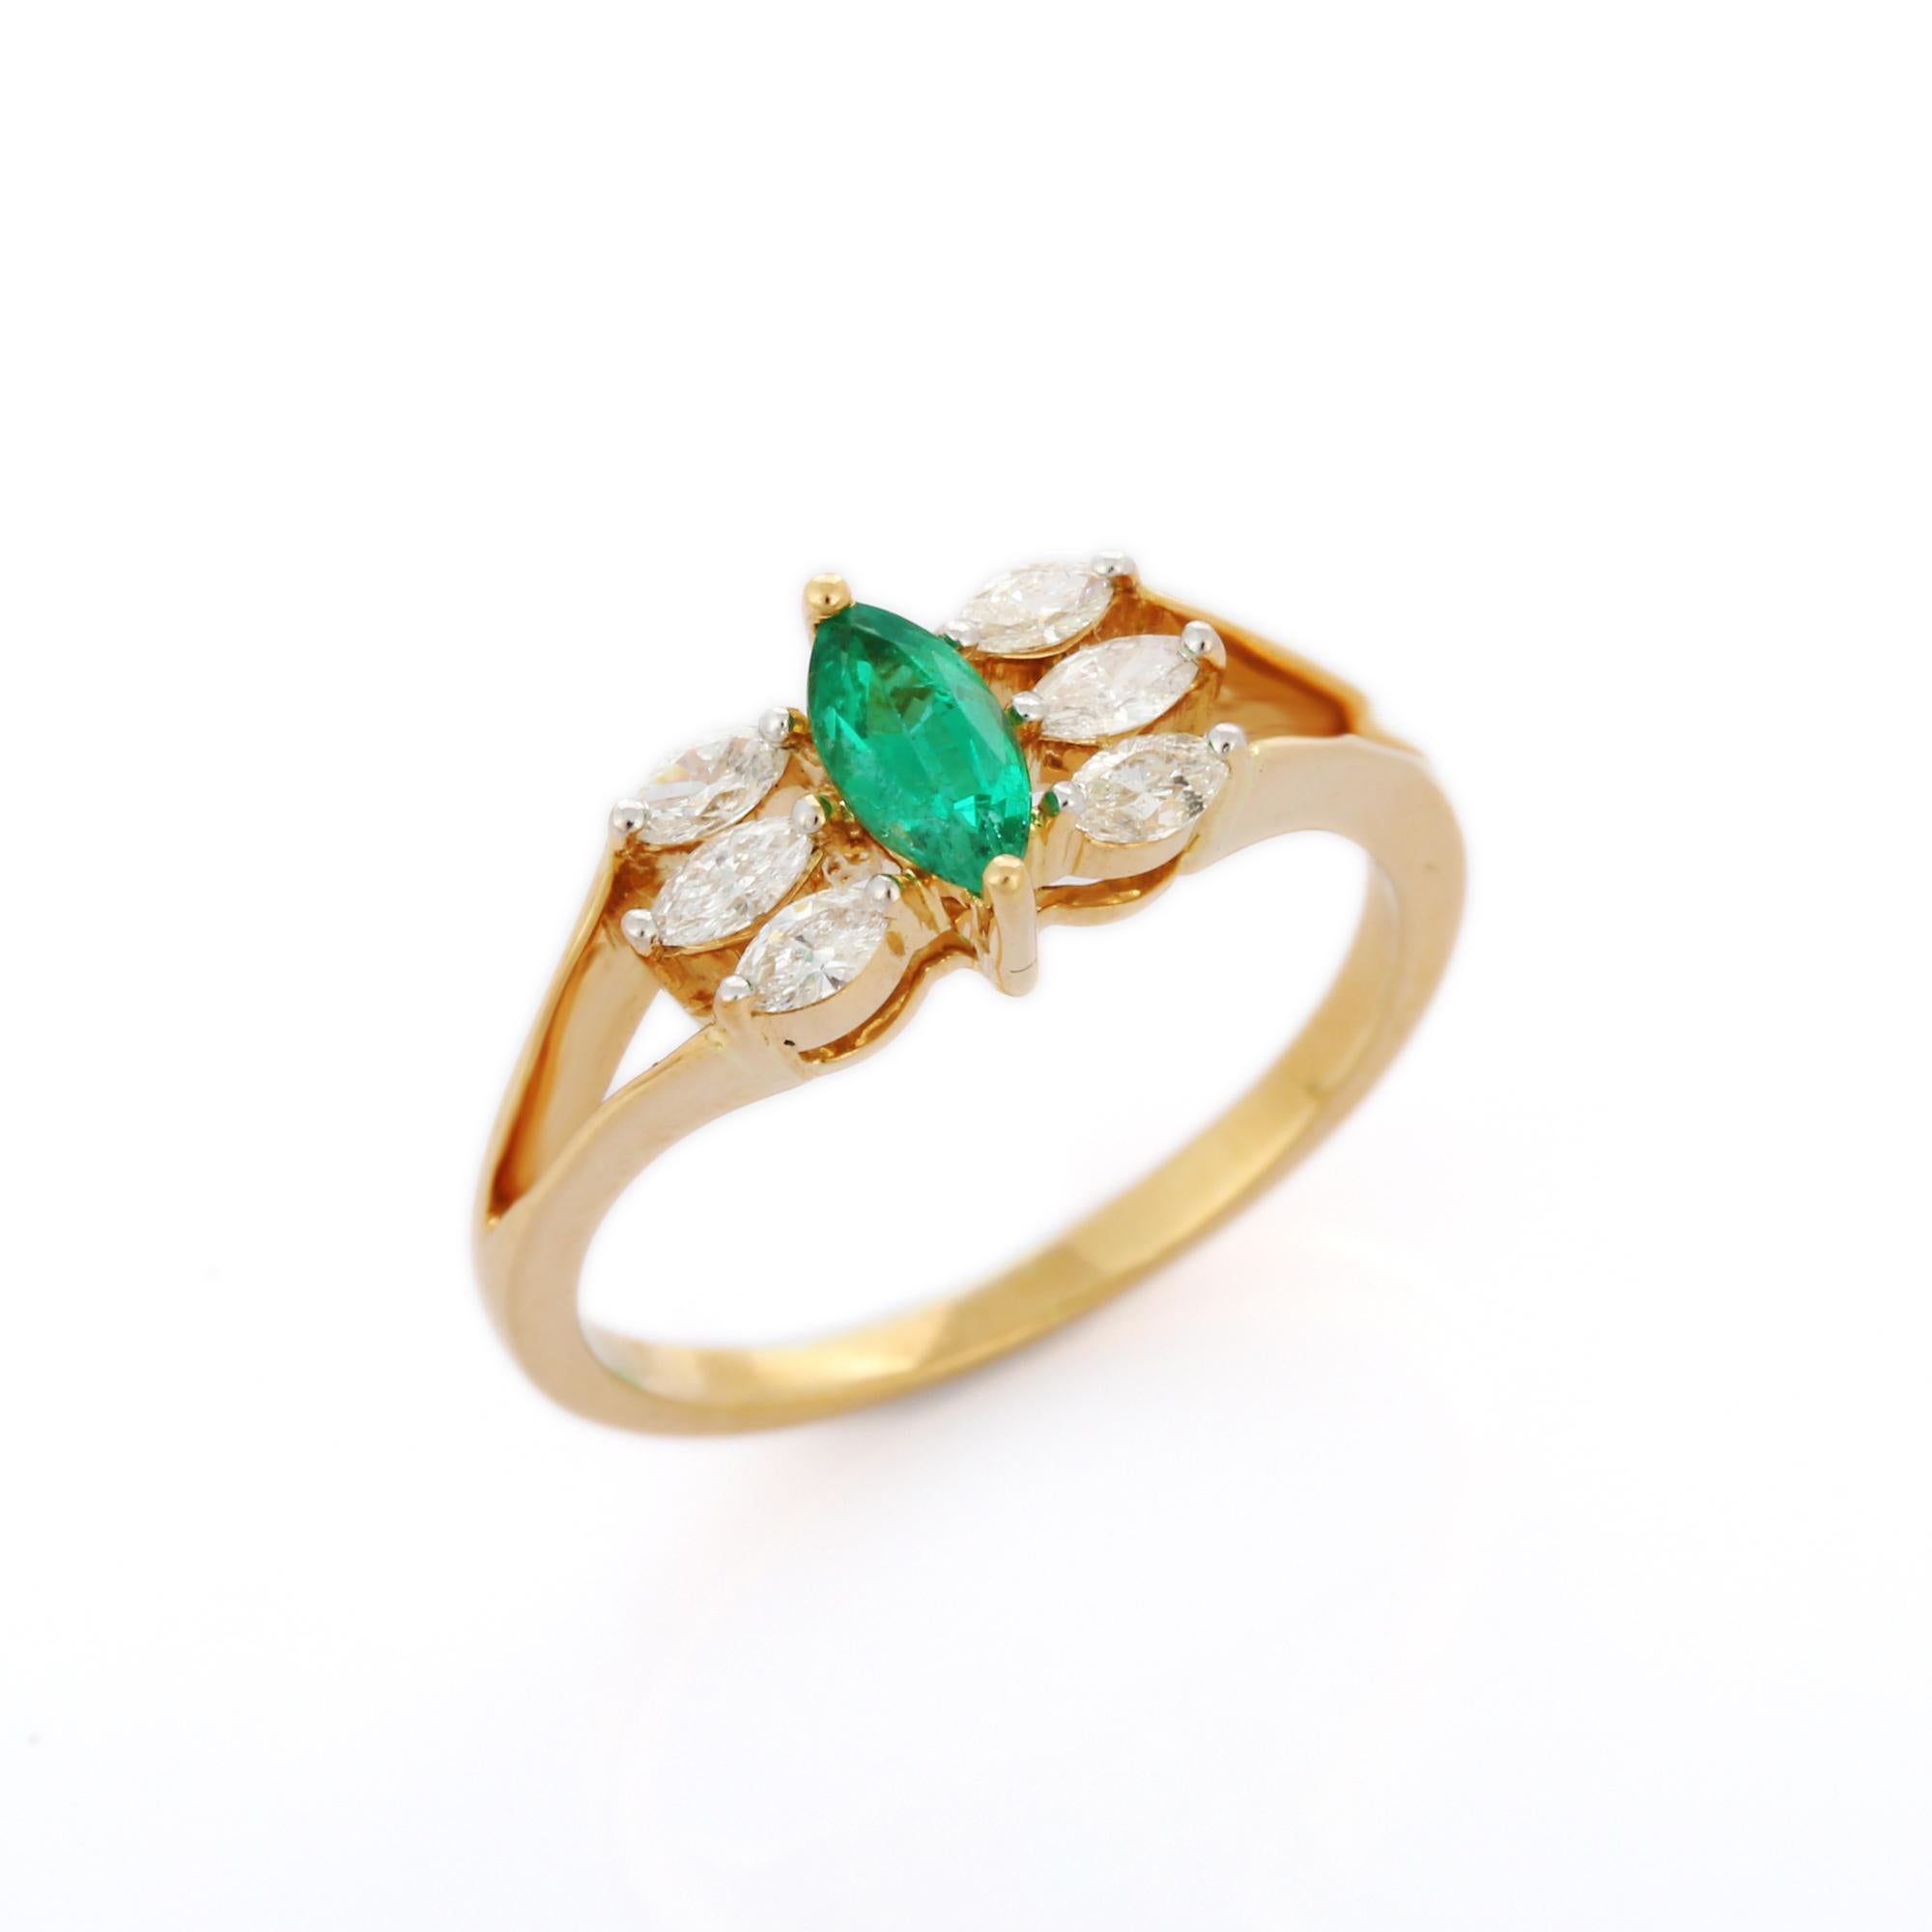 For Sale:  Startling Emerald and Diamond Designer Engagement Ring in 18K Solid Yellow Gold 5